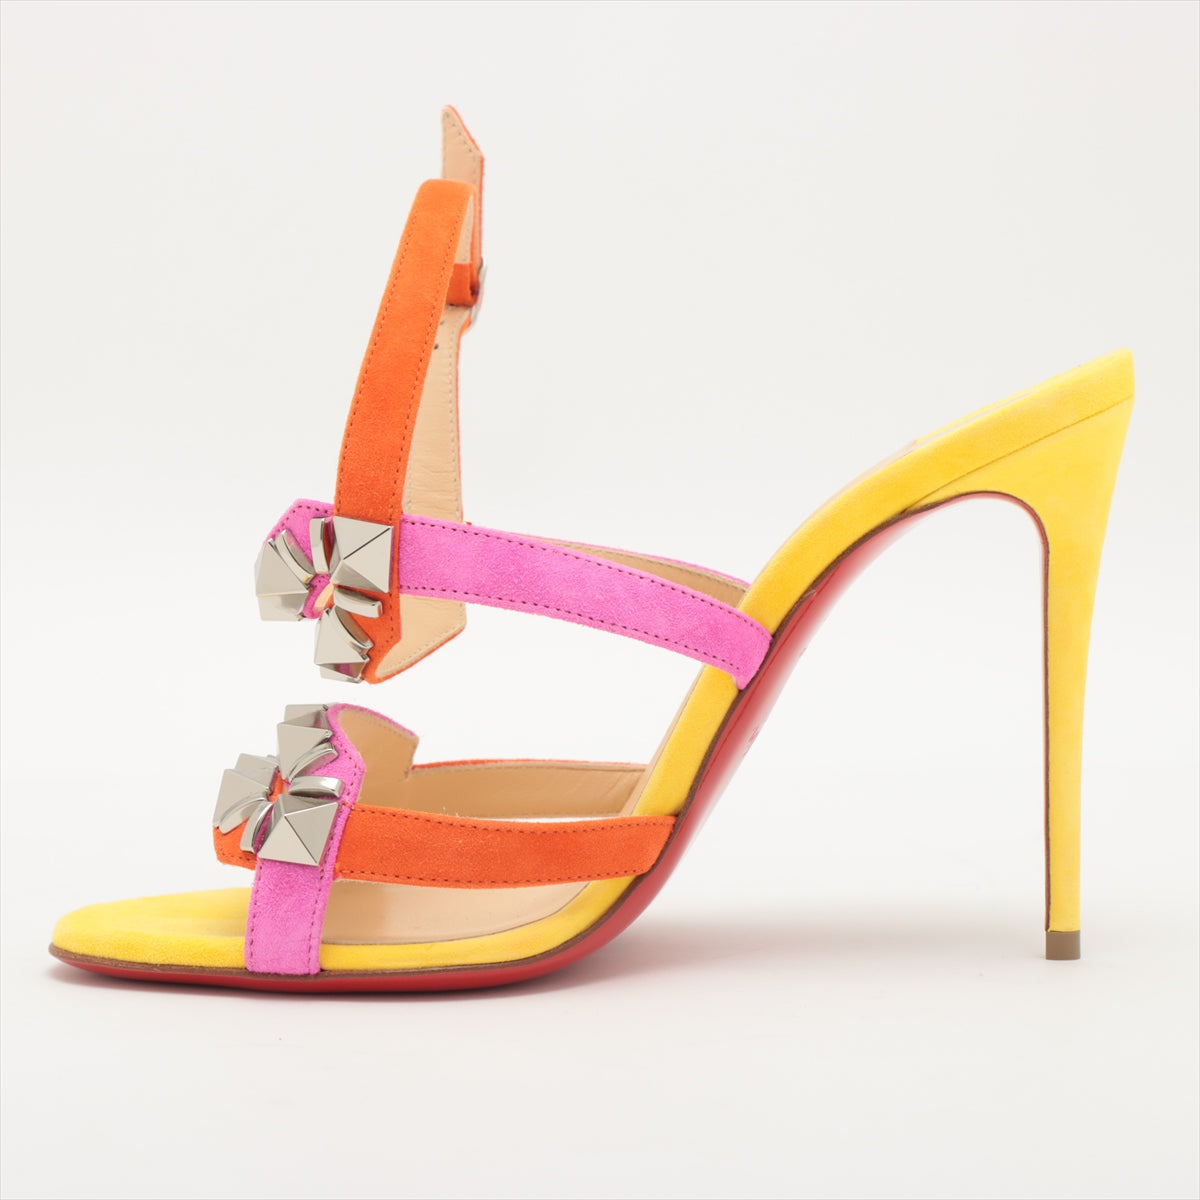 Christian Louboutin Suede Sandals 36 1/2 Ladies' Multicolor GALERIETTA 100 Rock Studs There is a box